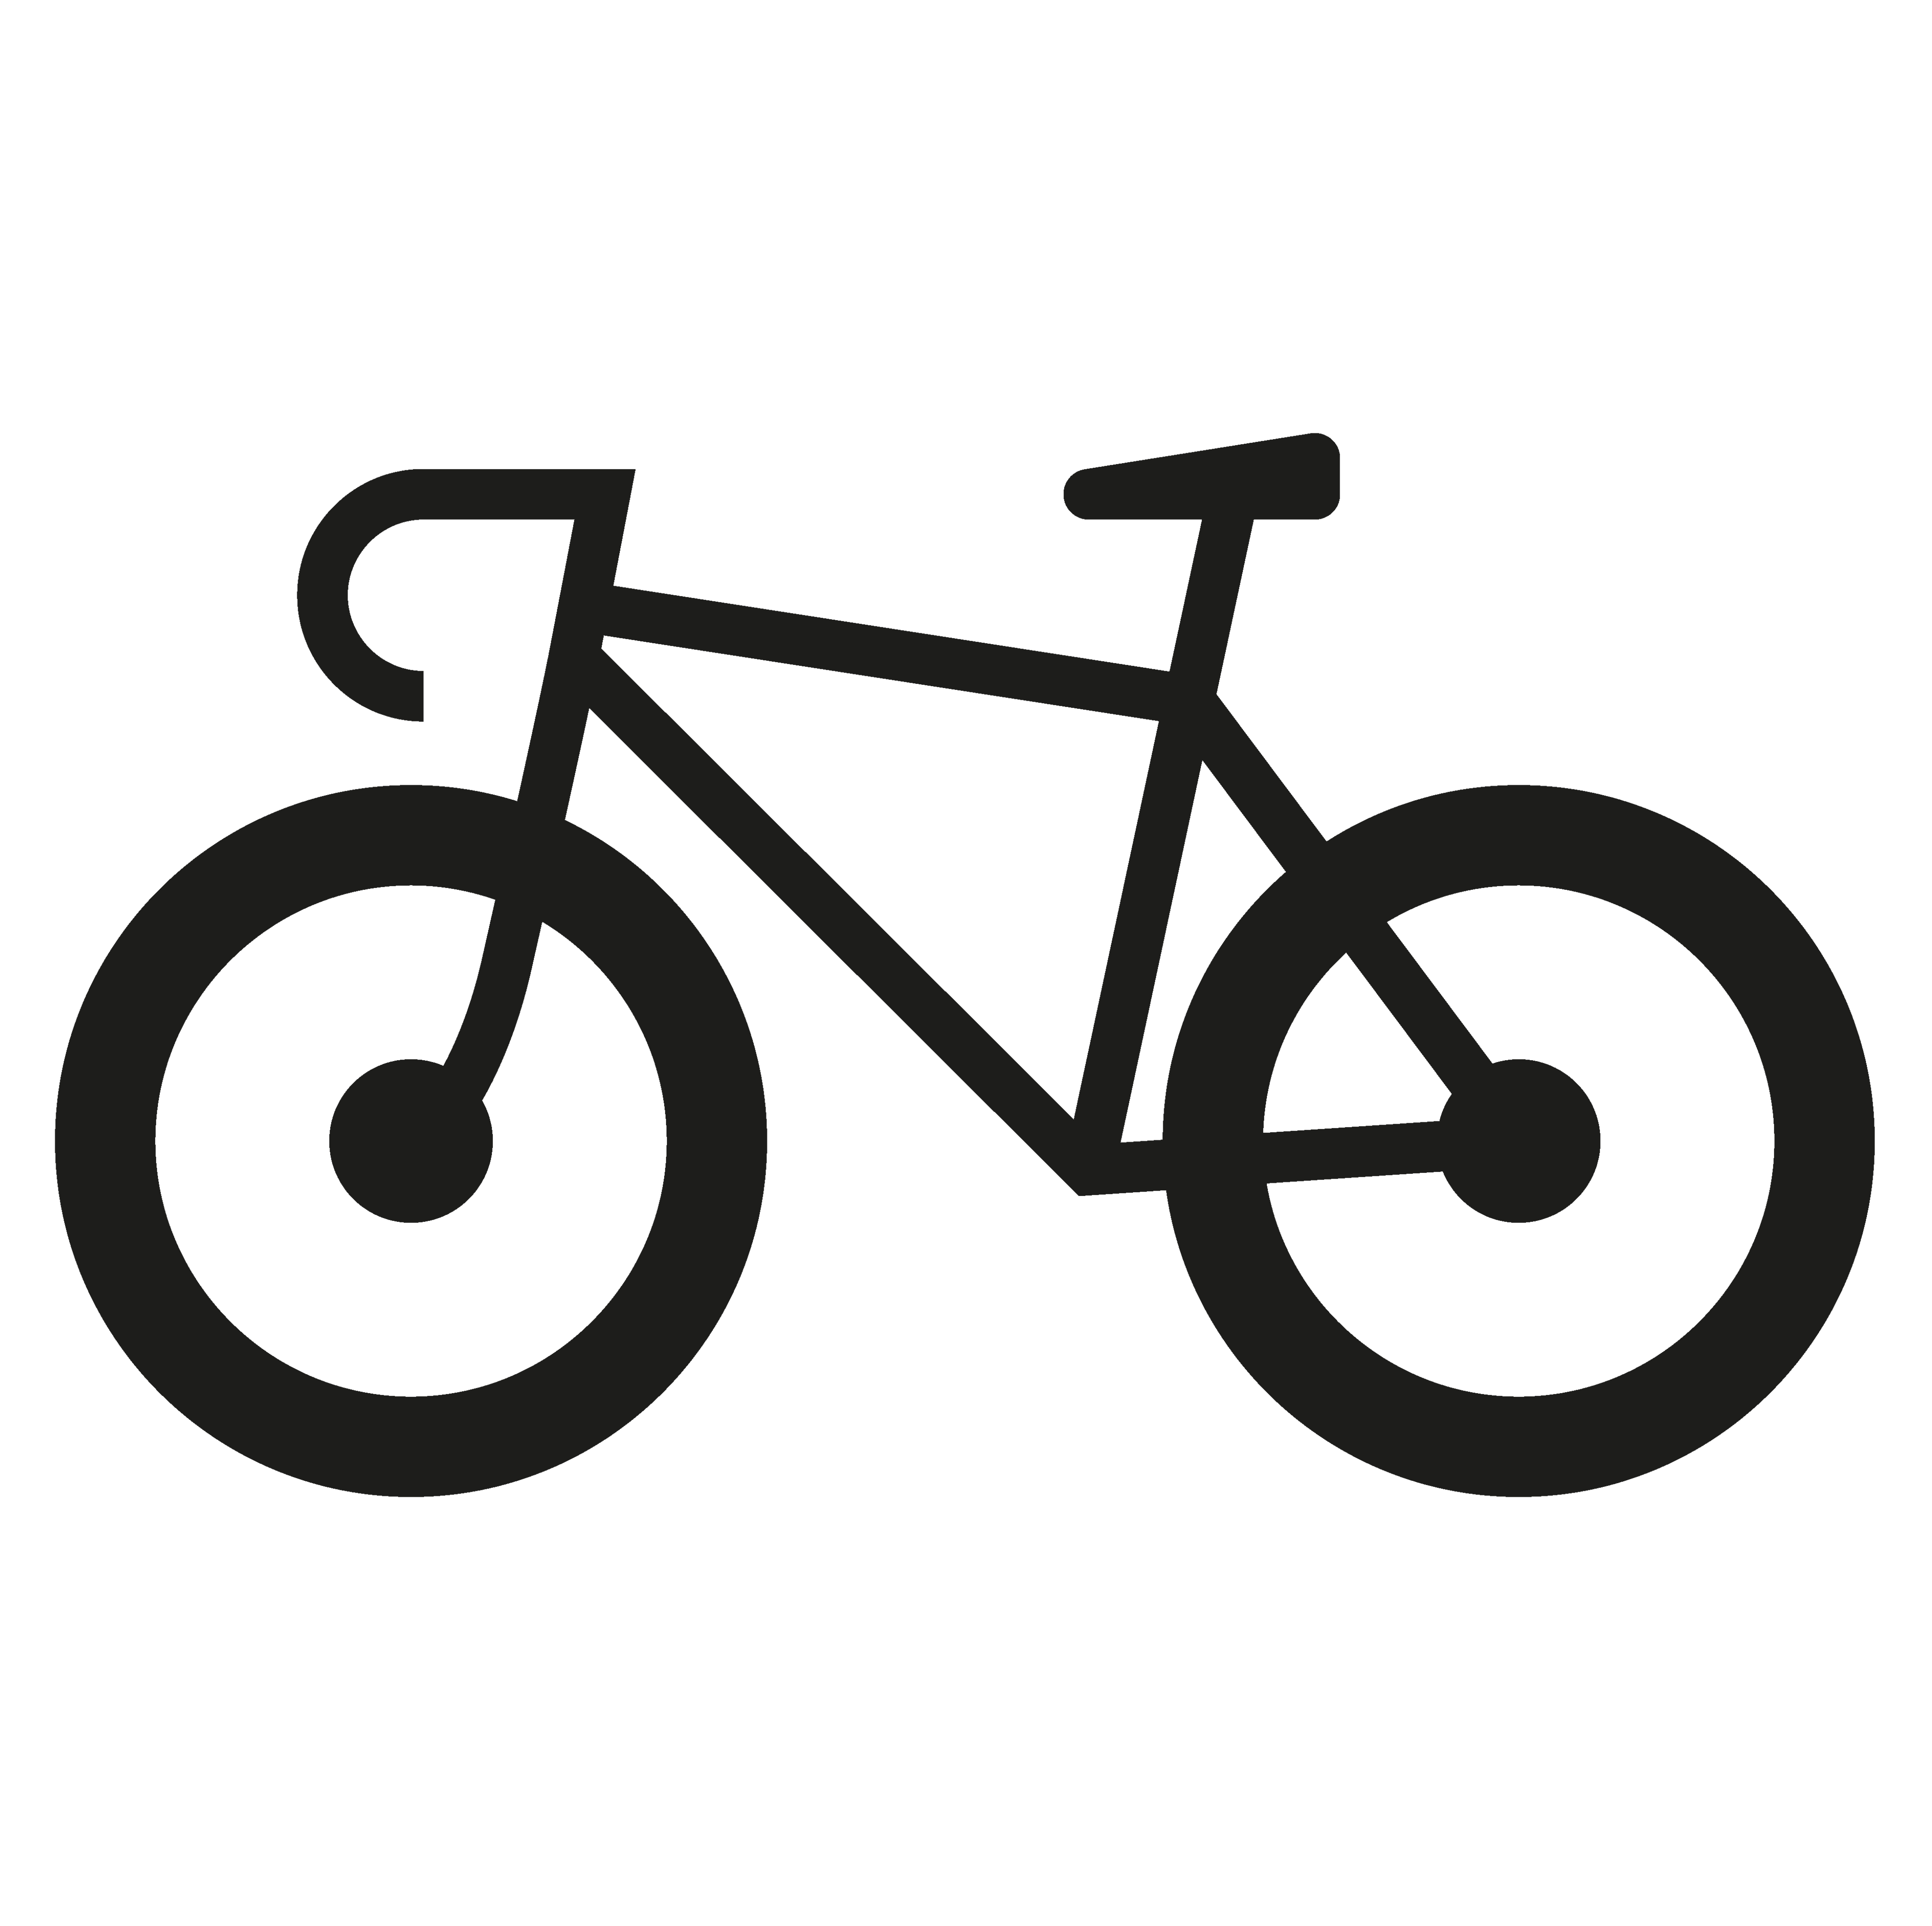 Cycle clipart front, Cycle front Transparent FREE for